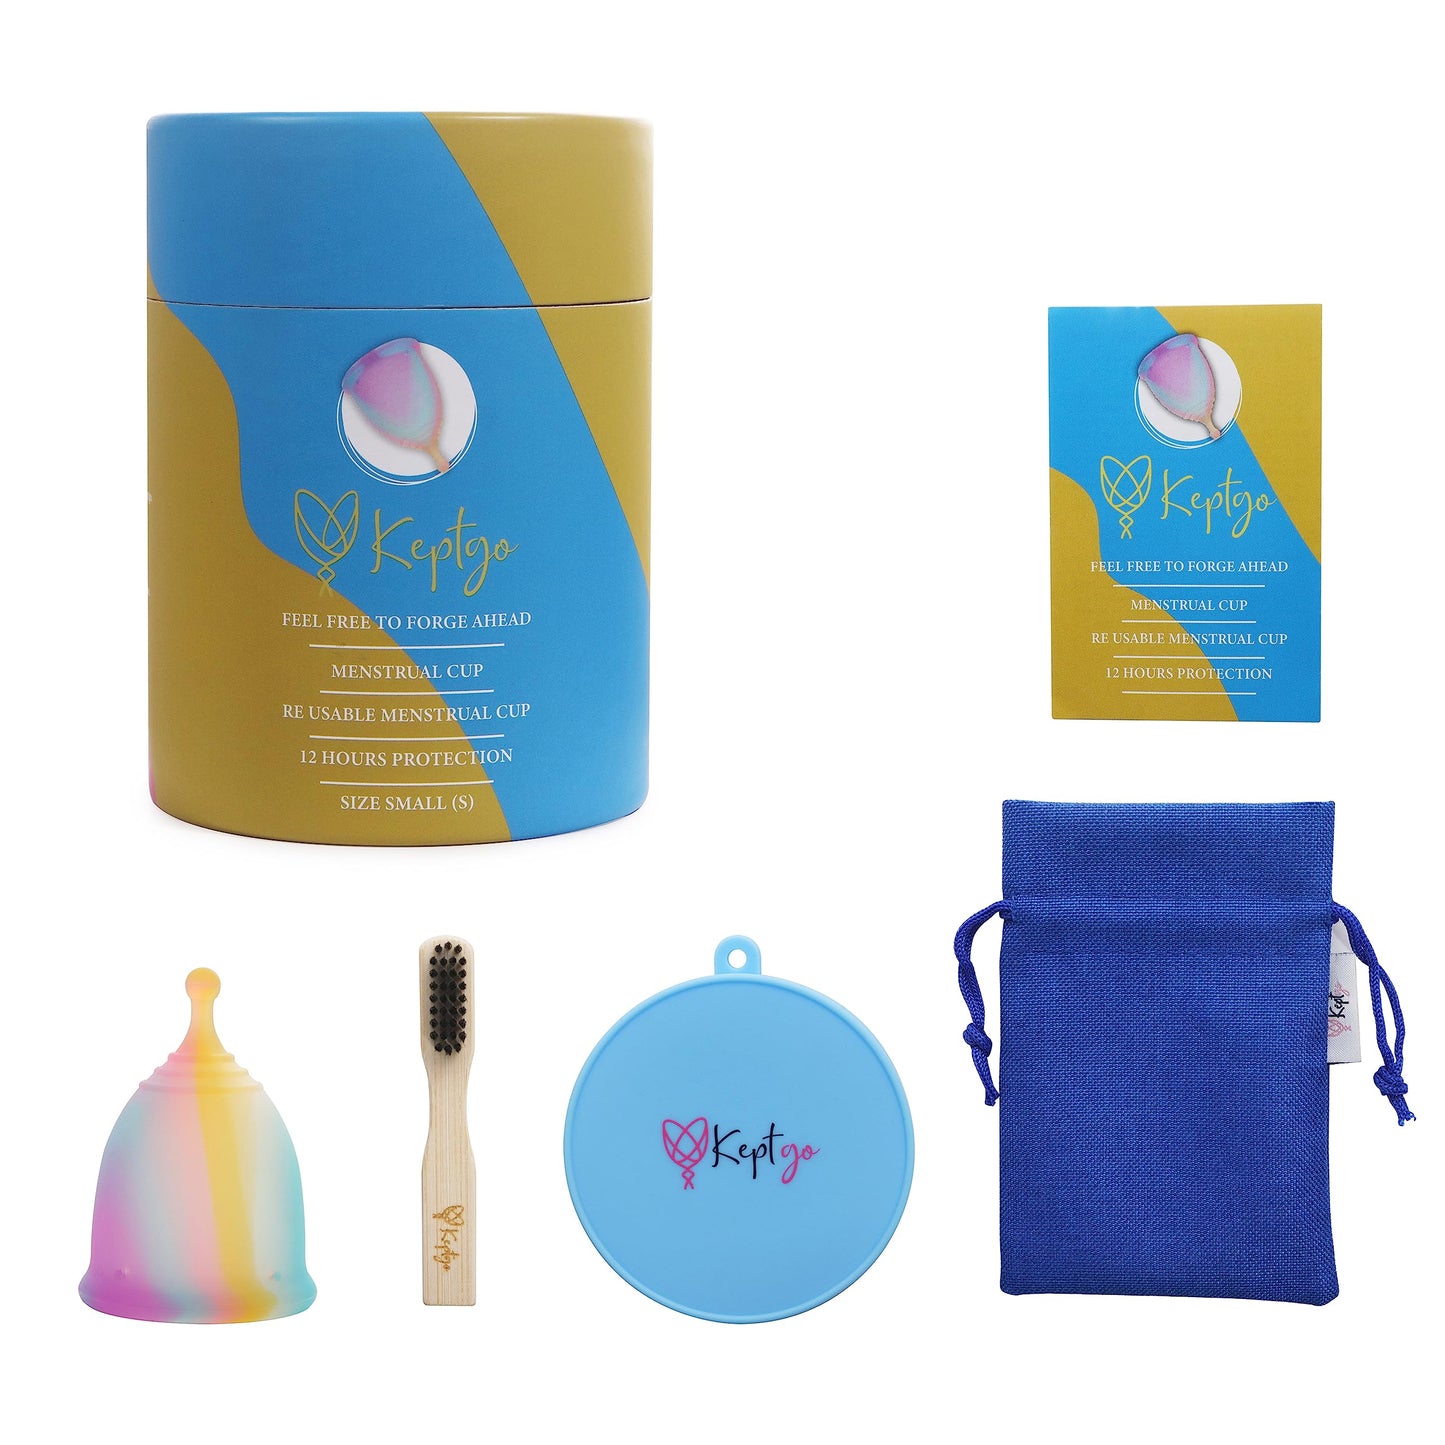 Keptgo Reusable Menstrual Cup With Sterilizer & Brush | Ultra Soft Odour & Rash Free | 100% Medical Grade Silicone | No Leakage | Protection for Up to 10-12 Hours | US FDA Registered - small (Small)